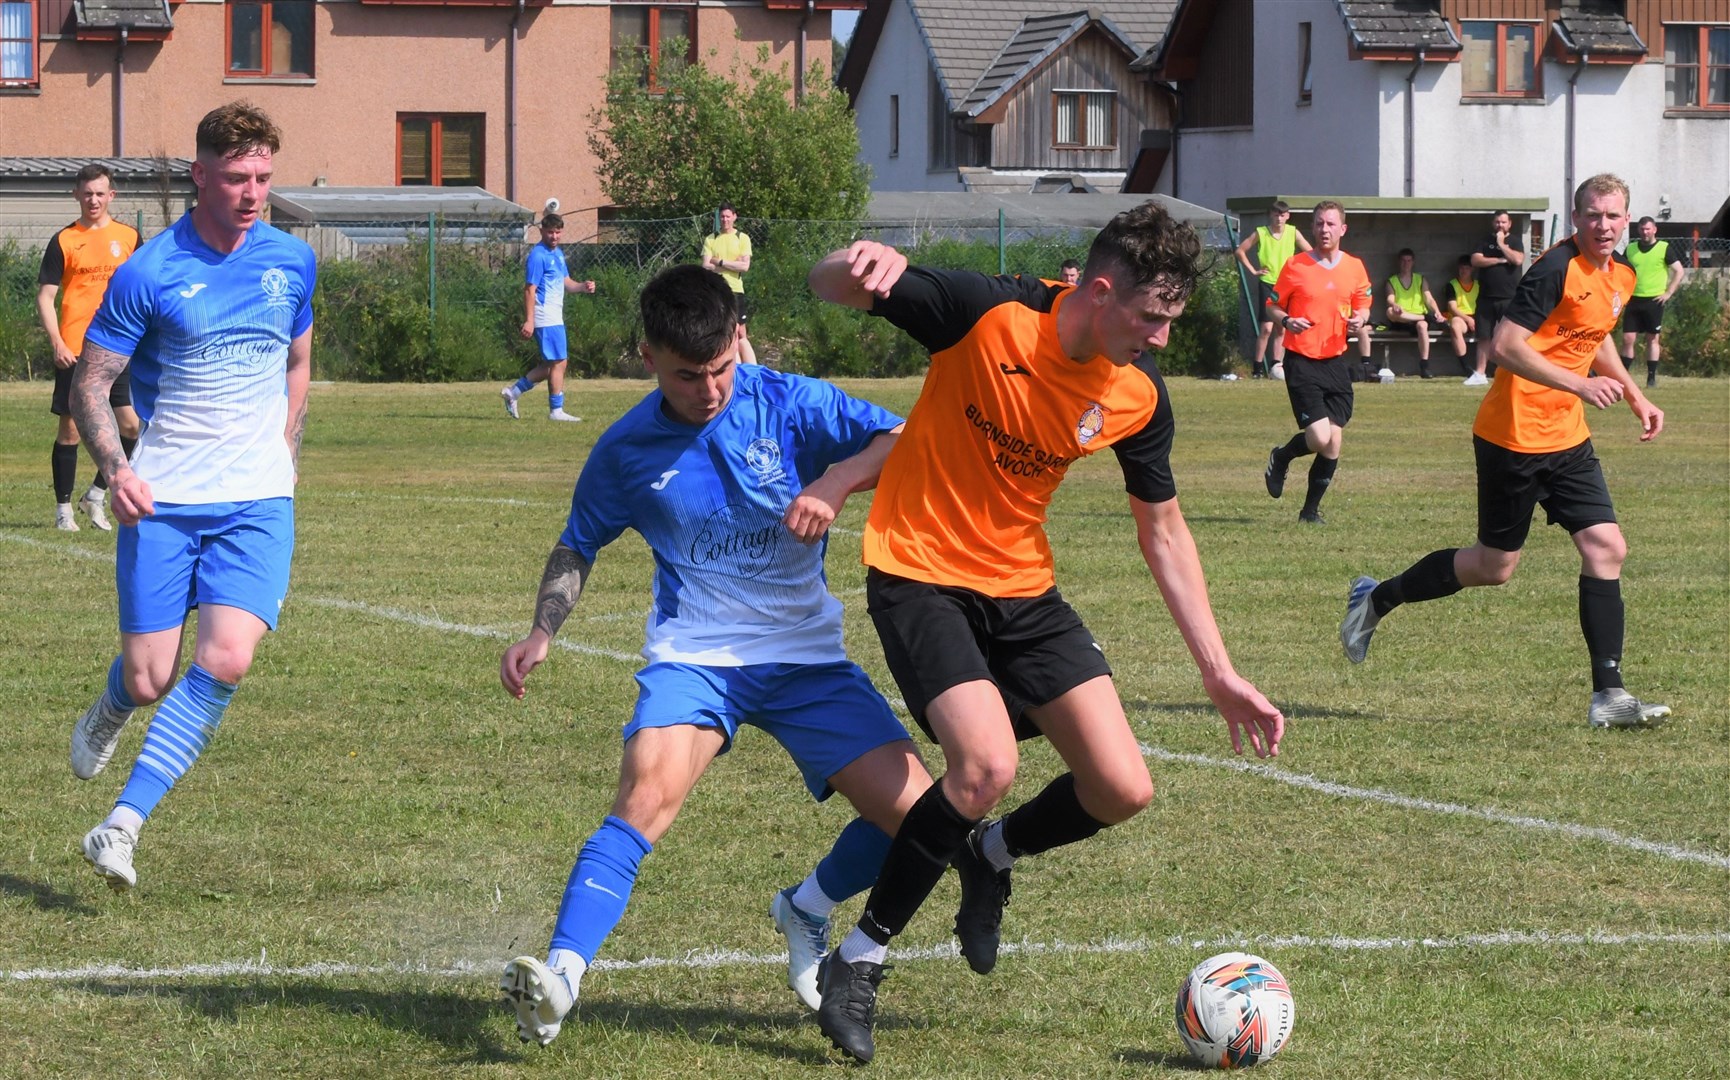 Avoch in action against Maryburgh earlier this season.